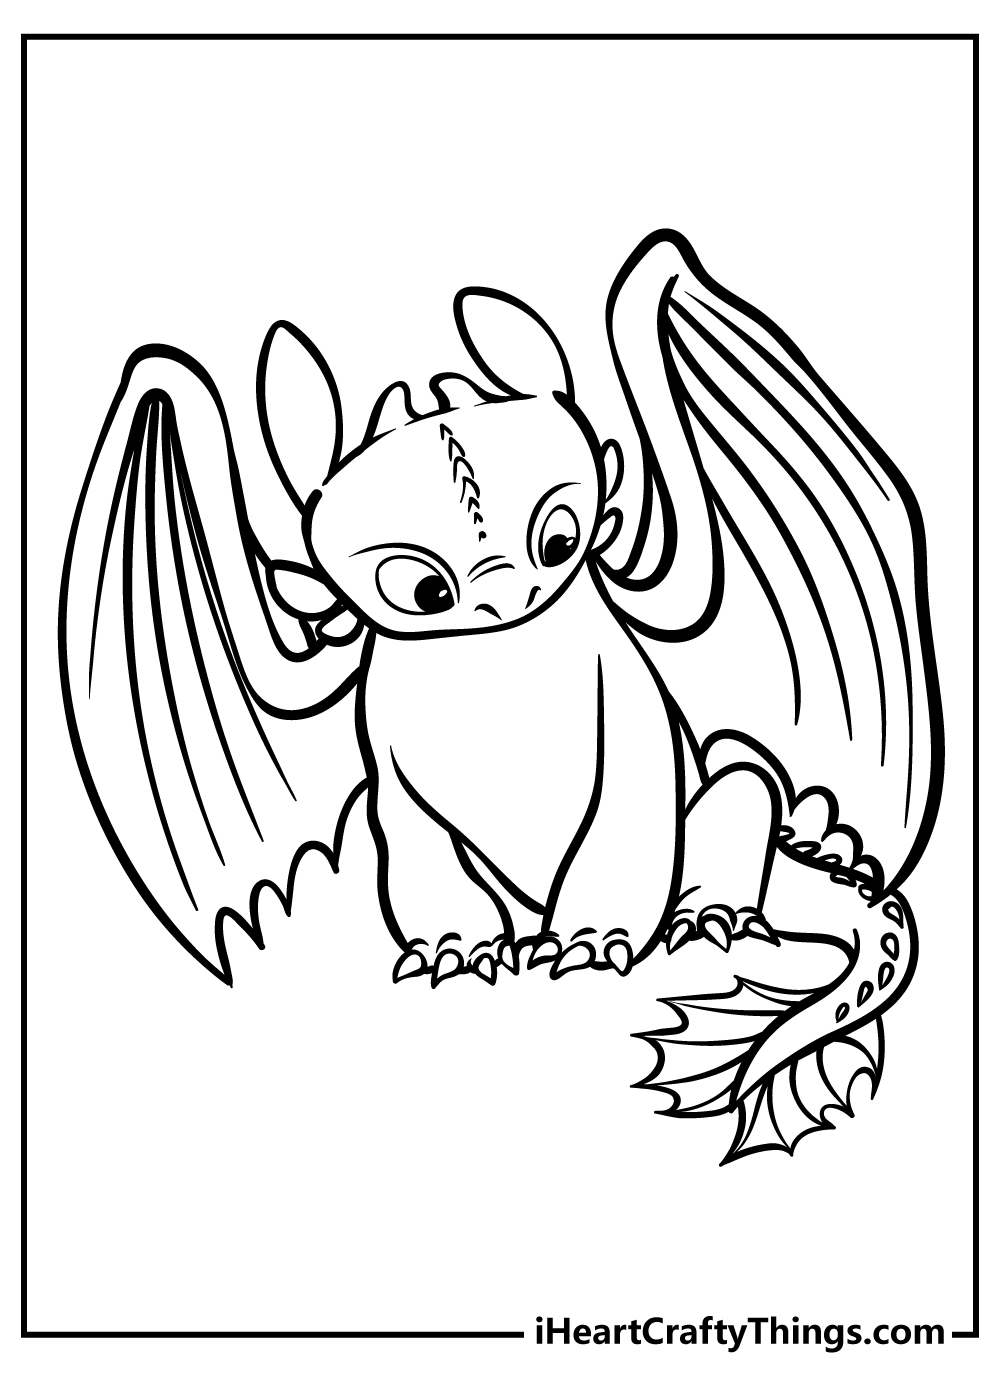 How To Train Your Dragon Coloring Pages for kids free download